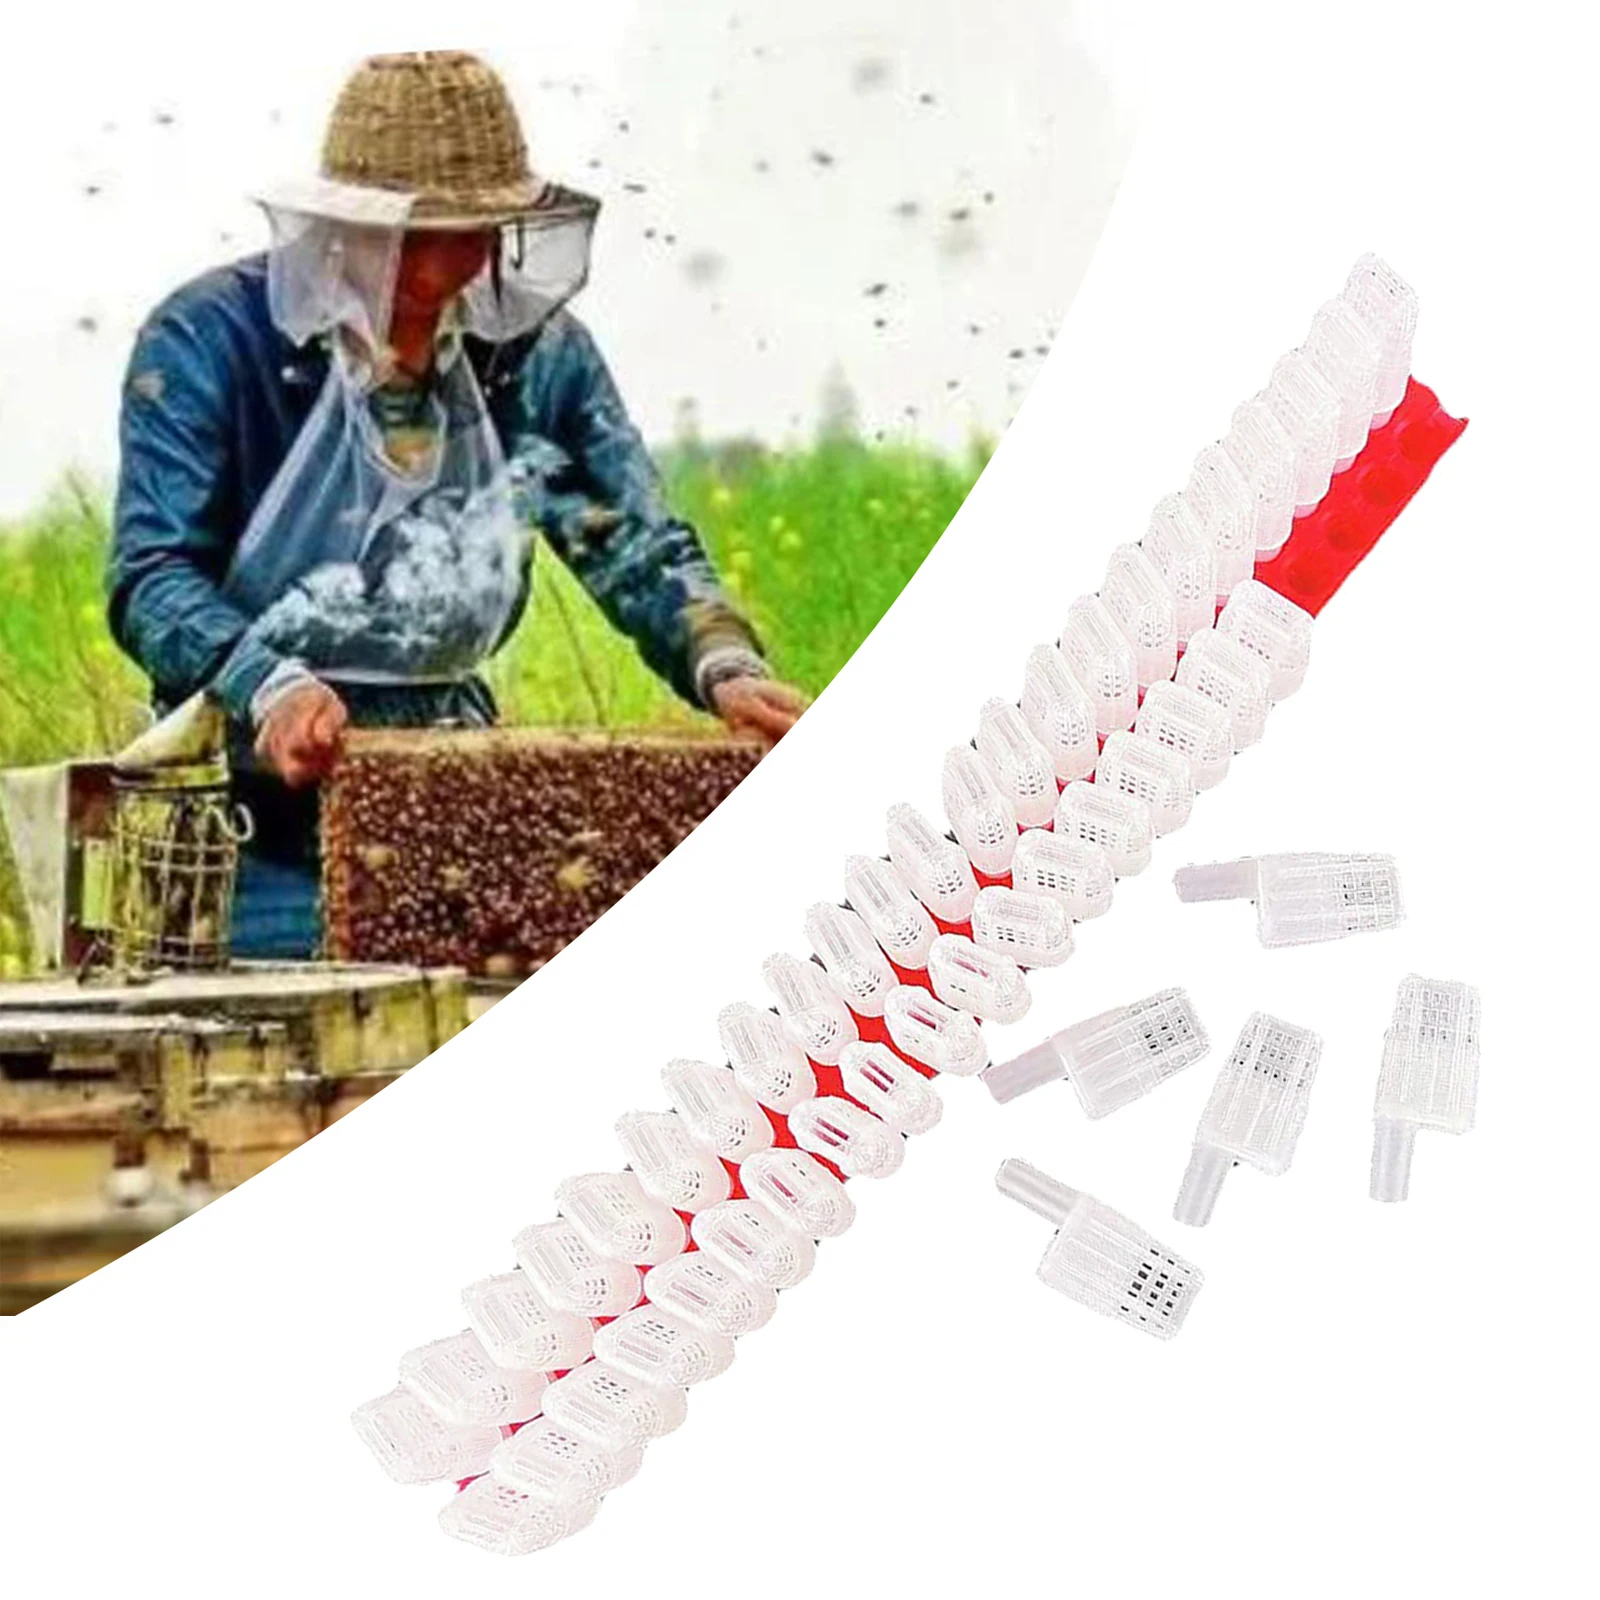 46 PCS Plastic Queen Bee Moving Isolator Hive Rearing Box Cage Protection Case Beekeeping Beekeeper Equipment Supplies